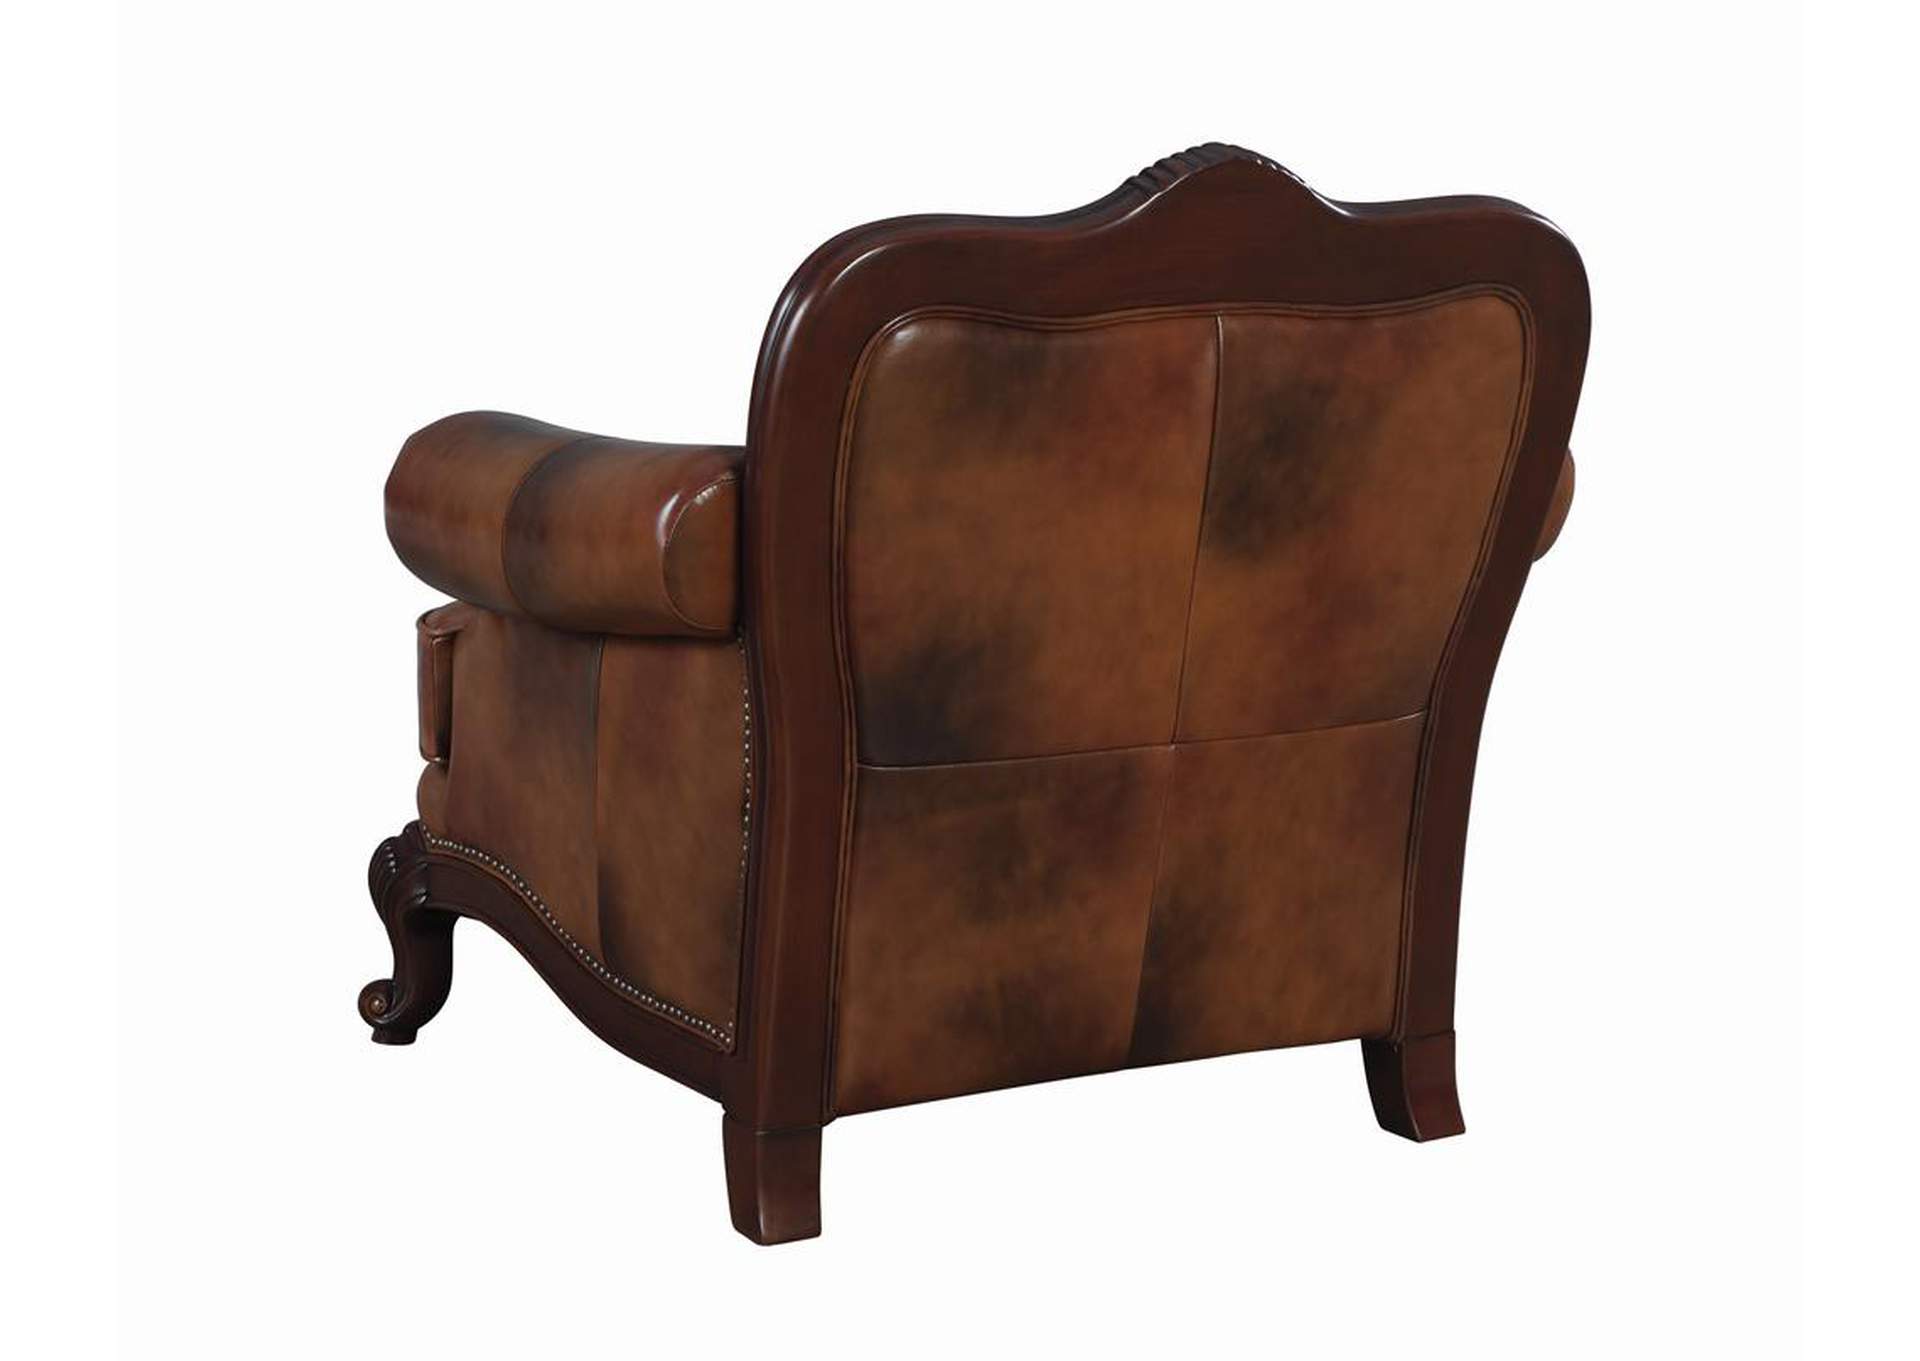 Victoria Rolled Arm Chair Tri-tone and Brown,Coaster Furniture